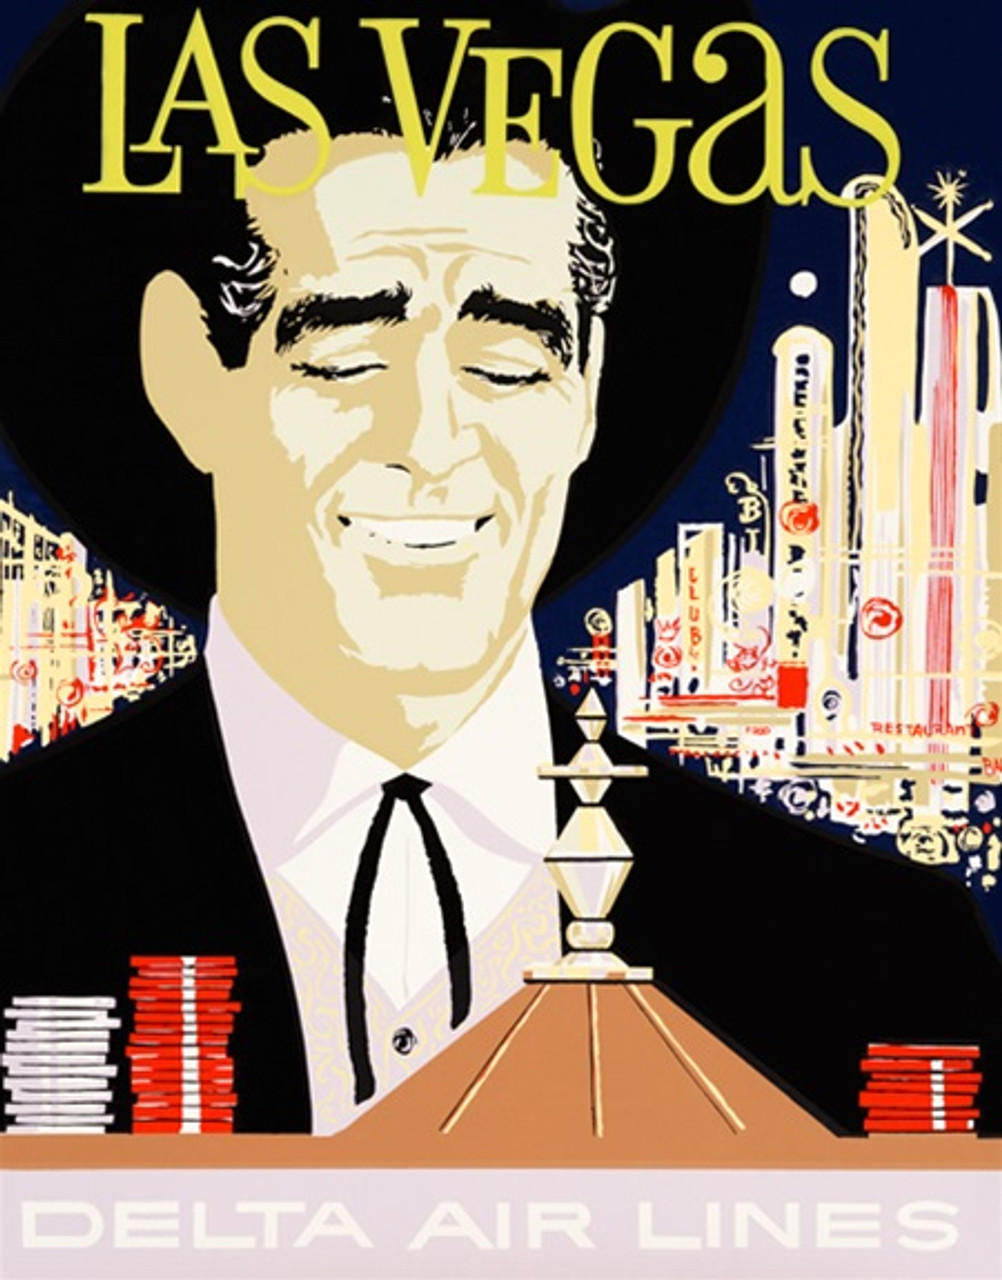 Delta Airlines to Las Vegas American poster. Travel destination advertisement features man looking at roulette game on a background off night city view.